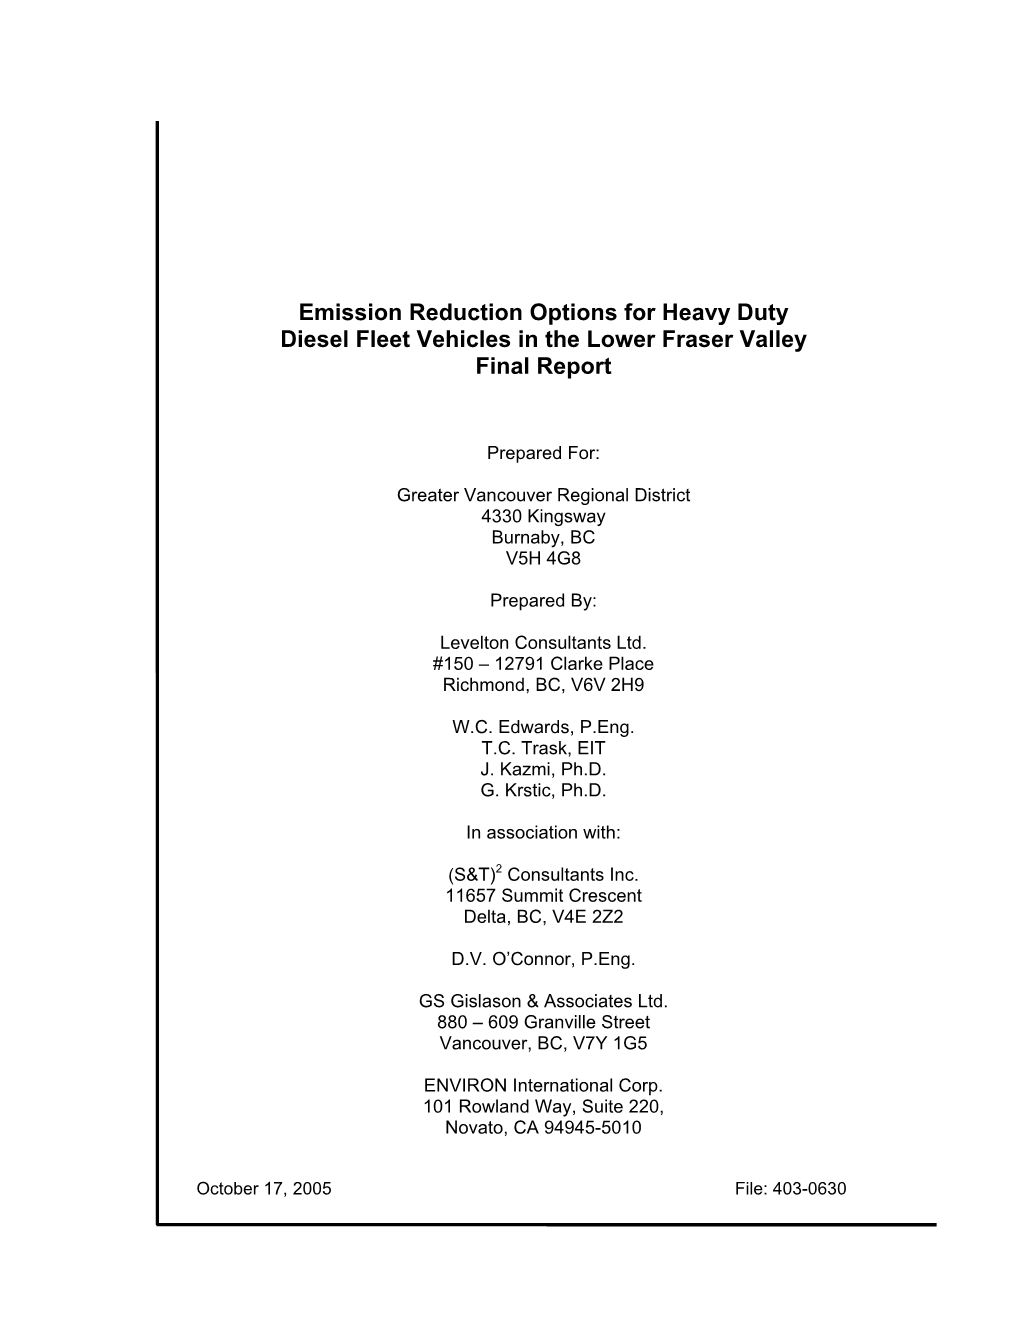 2005 Emission Reduction Options for Heavy Duty Diesel Fleet Vehicles in the Lower Fraser Valley